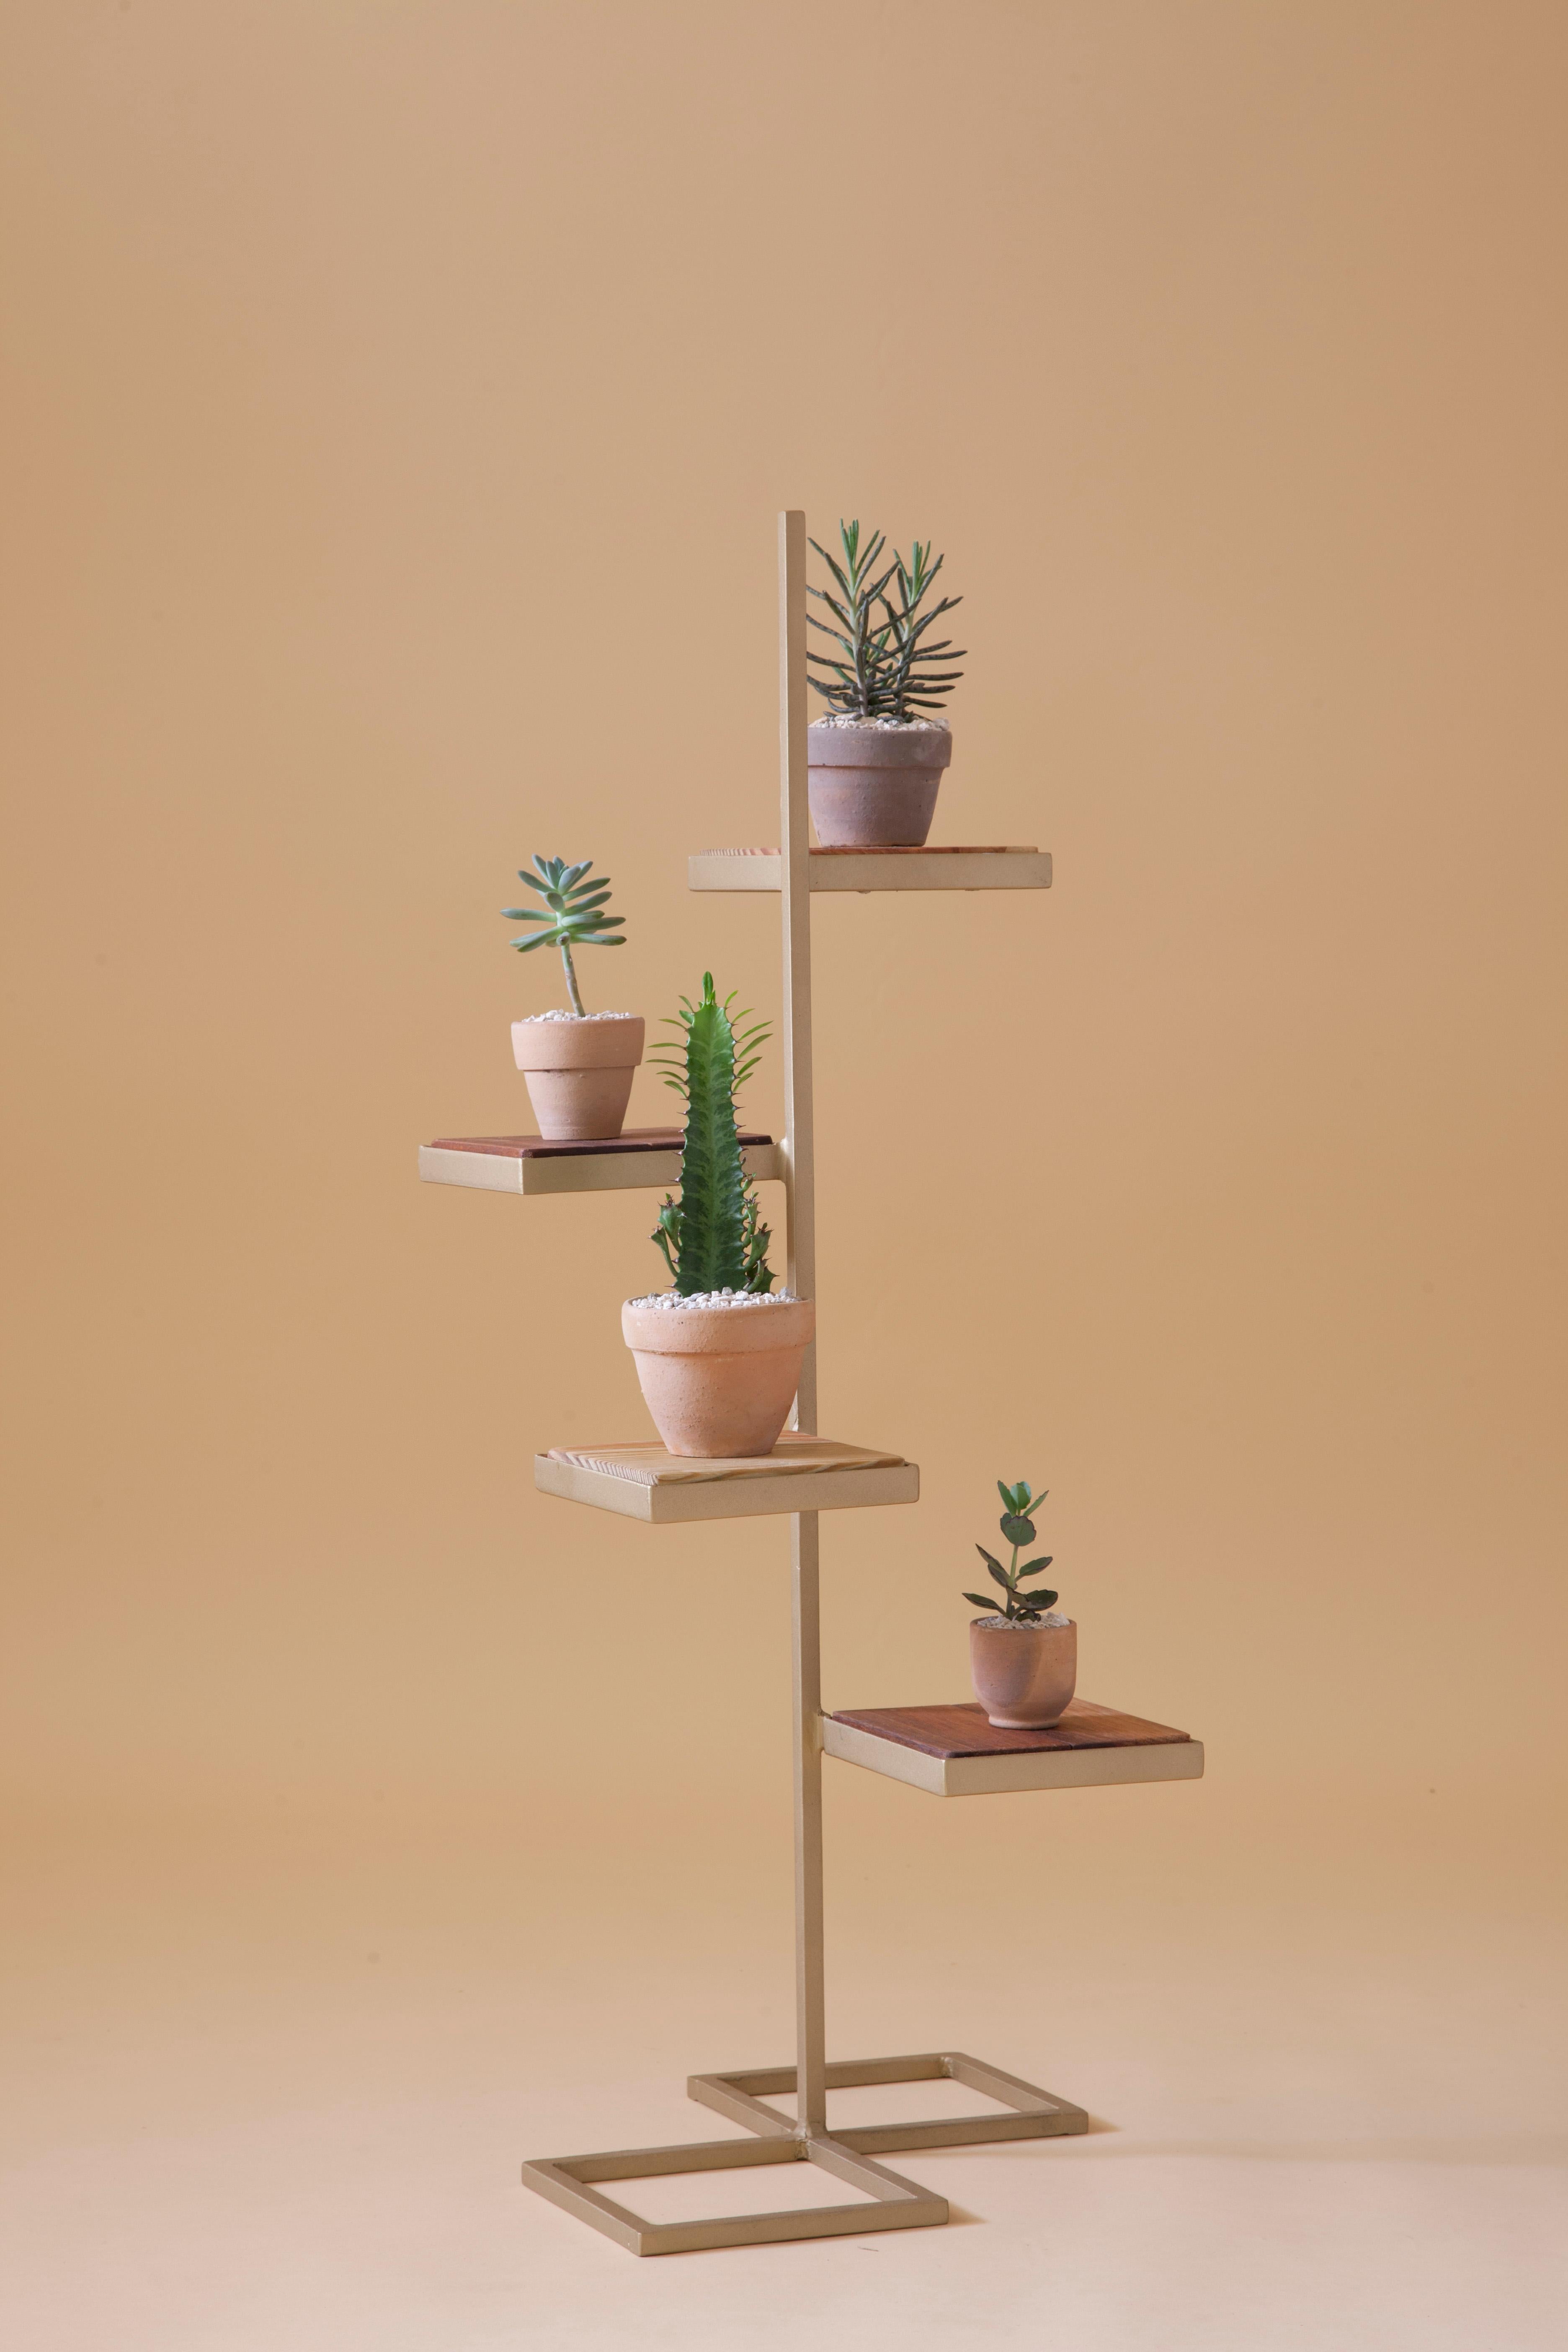 Aurea plant stand 3 by Sofia Alvarado
Limited edition 1 of 10 (one in stock)
Materials: Metal & woods / Golden, white or black.
Dimensions: 86cm (H) x 32cm (W) x 32cm (D)

FI is an ornamental artist who embodies the creative revelation of the